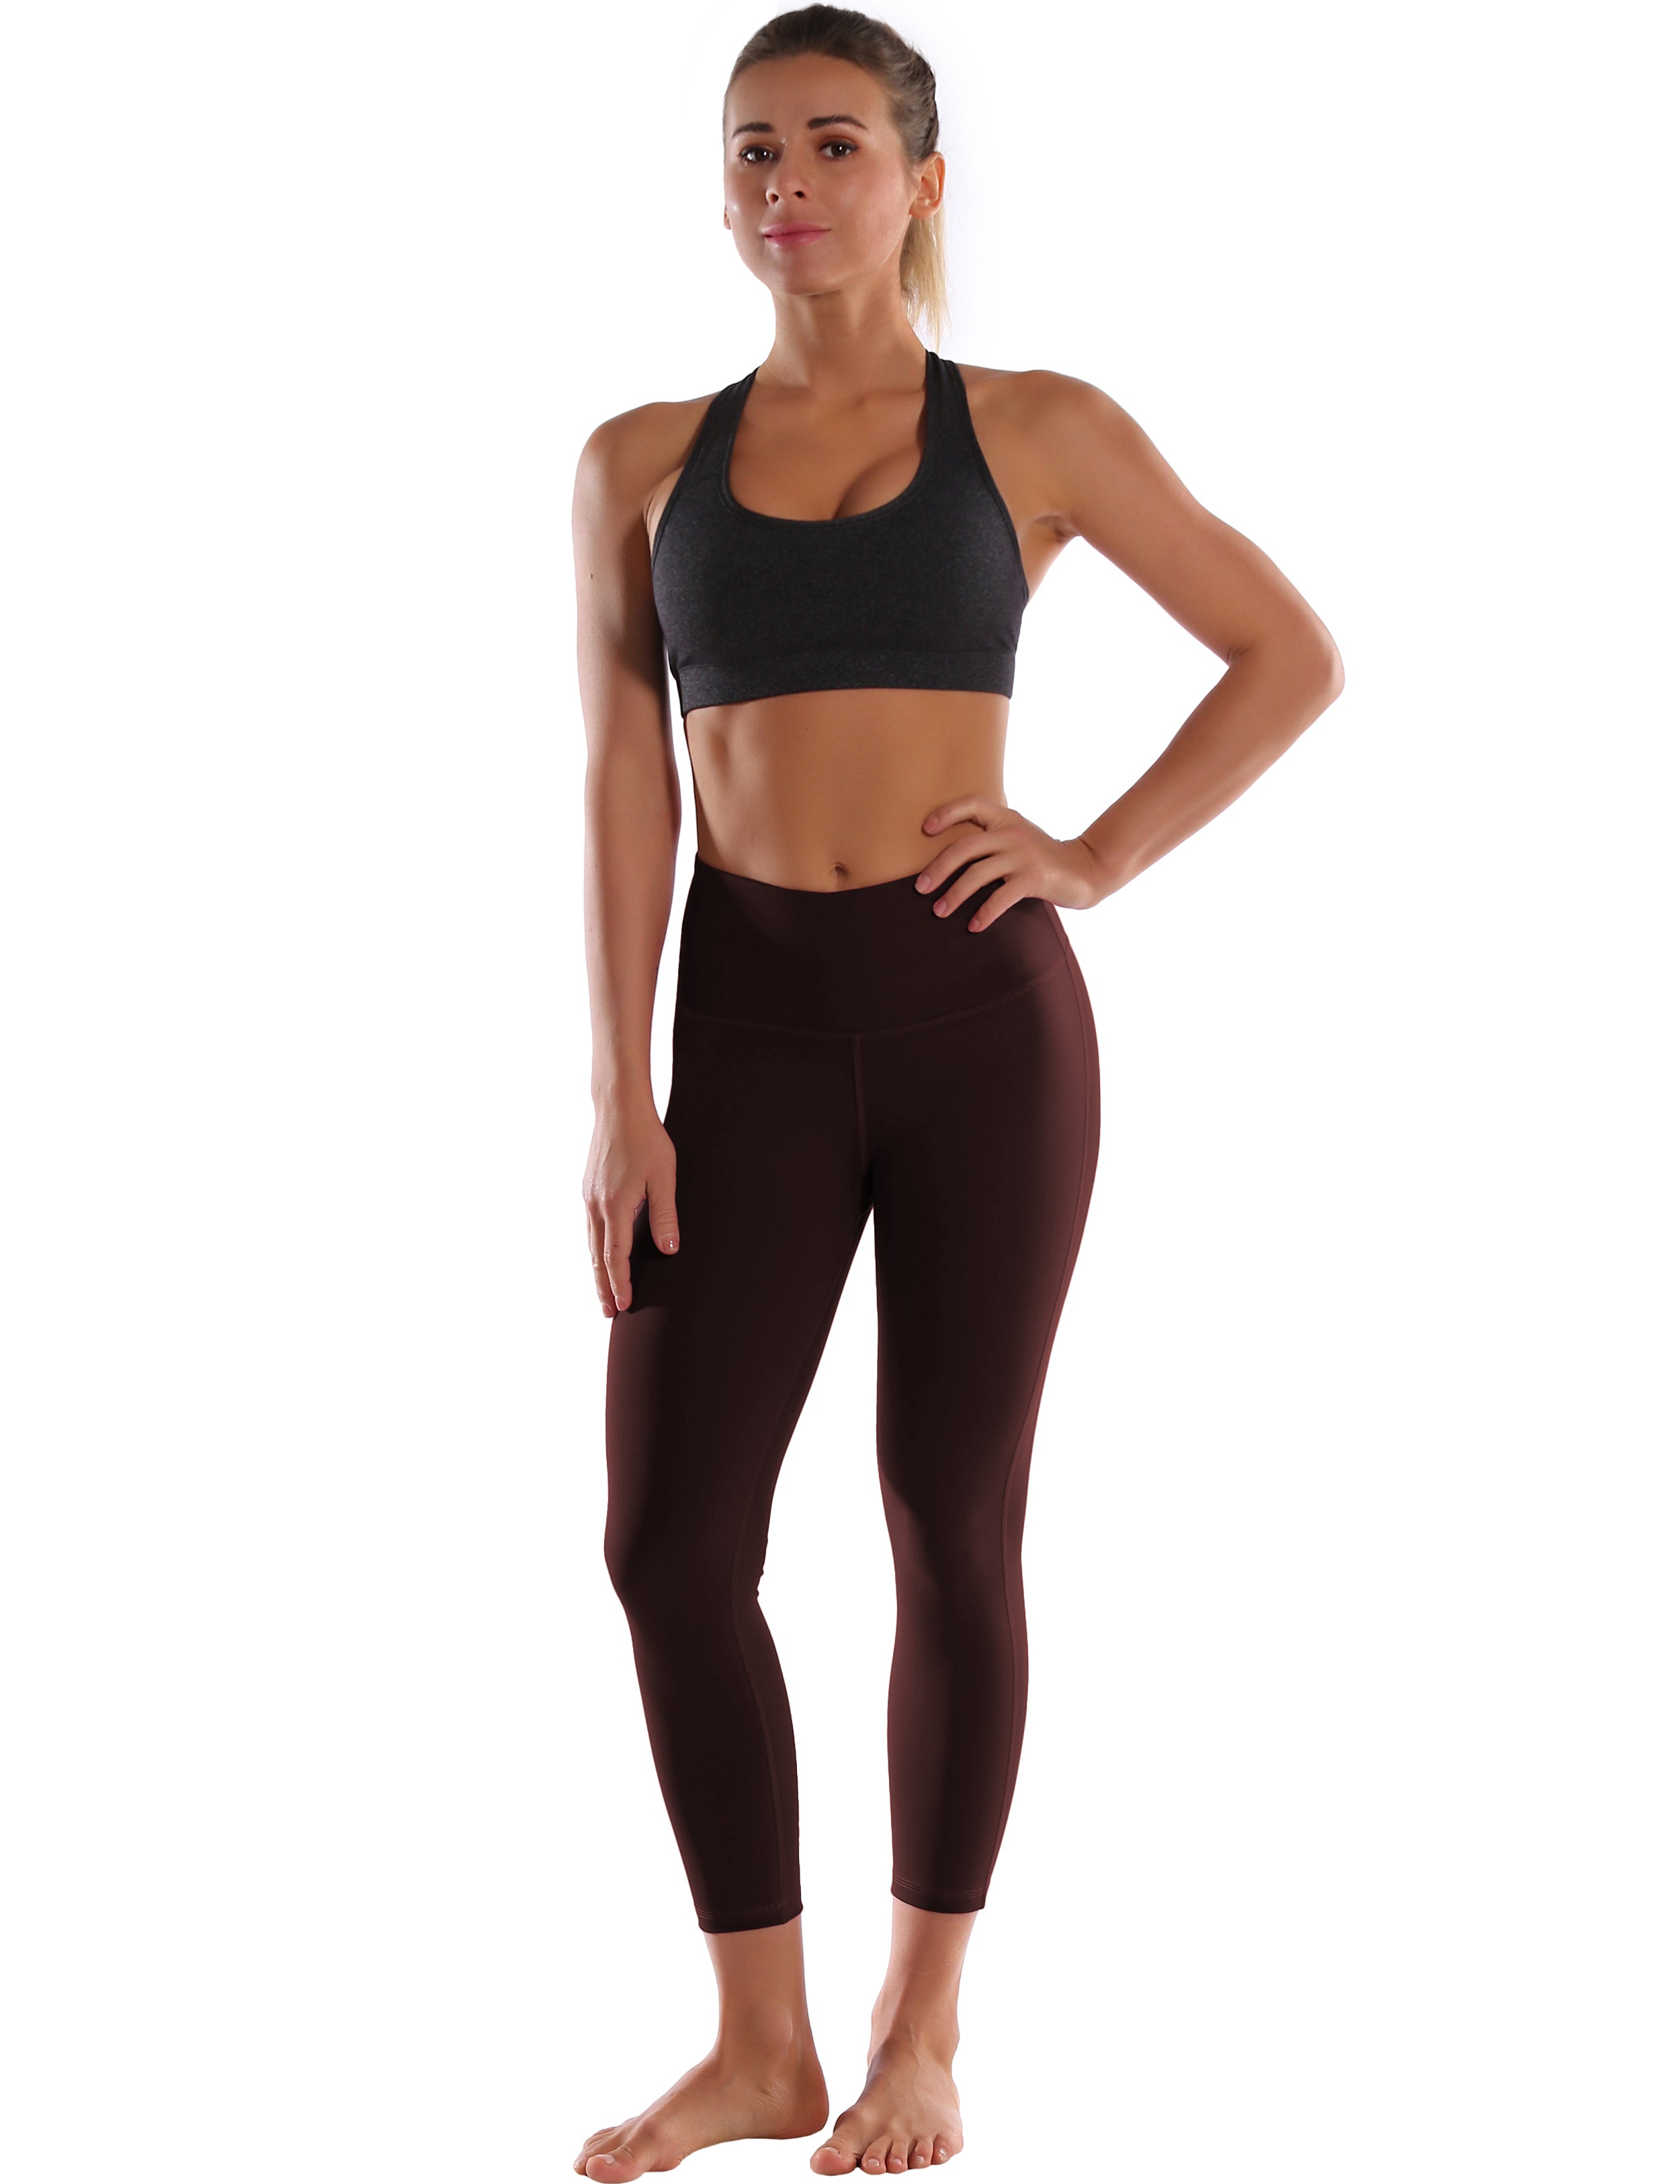 22" High Waist Side Line Capris mahoganymaroon 75%Nylon/25%Spandex Fabric doesn't attract lint easily 4-way stretch No see-through Moisture-wicking Tummy control Inner pocket